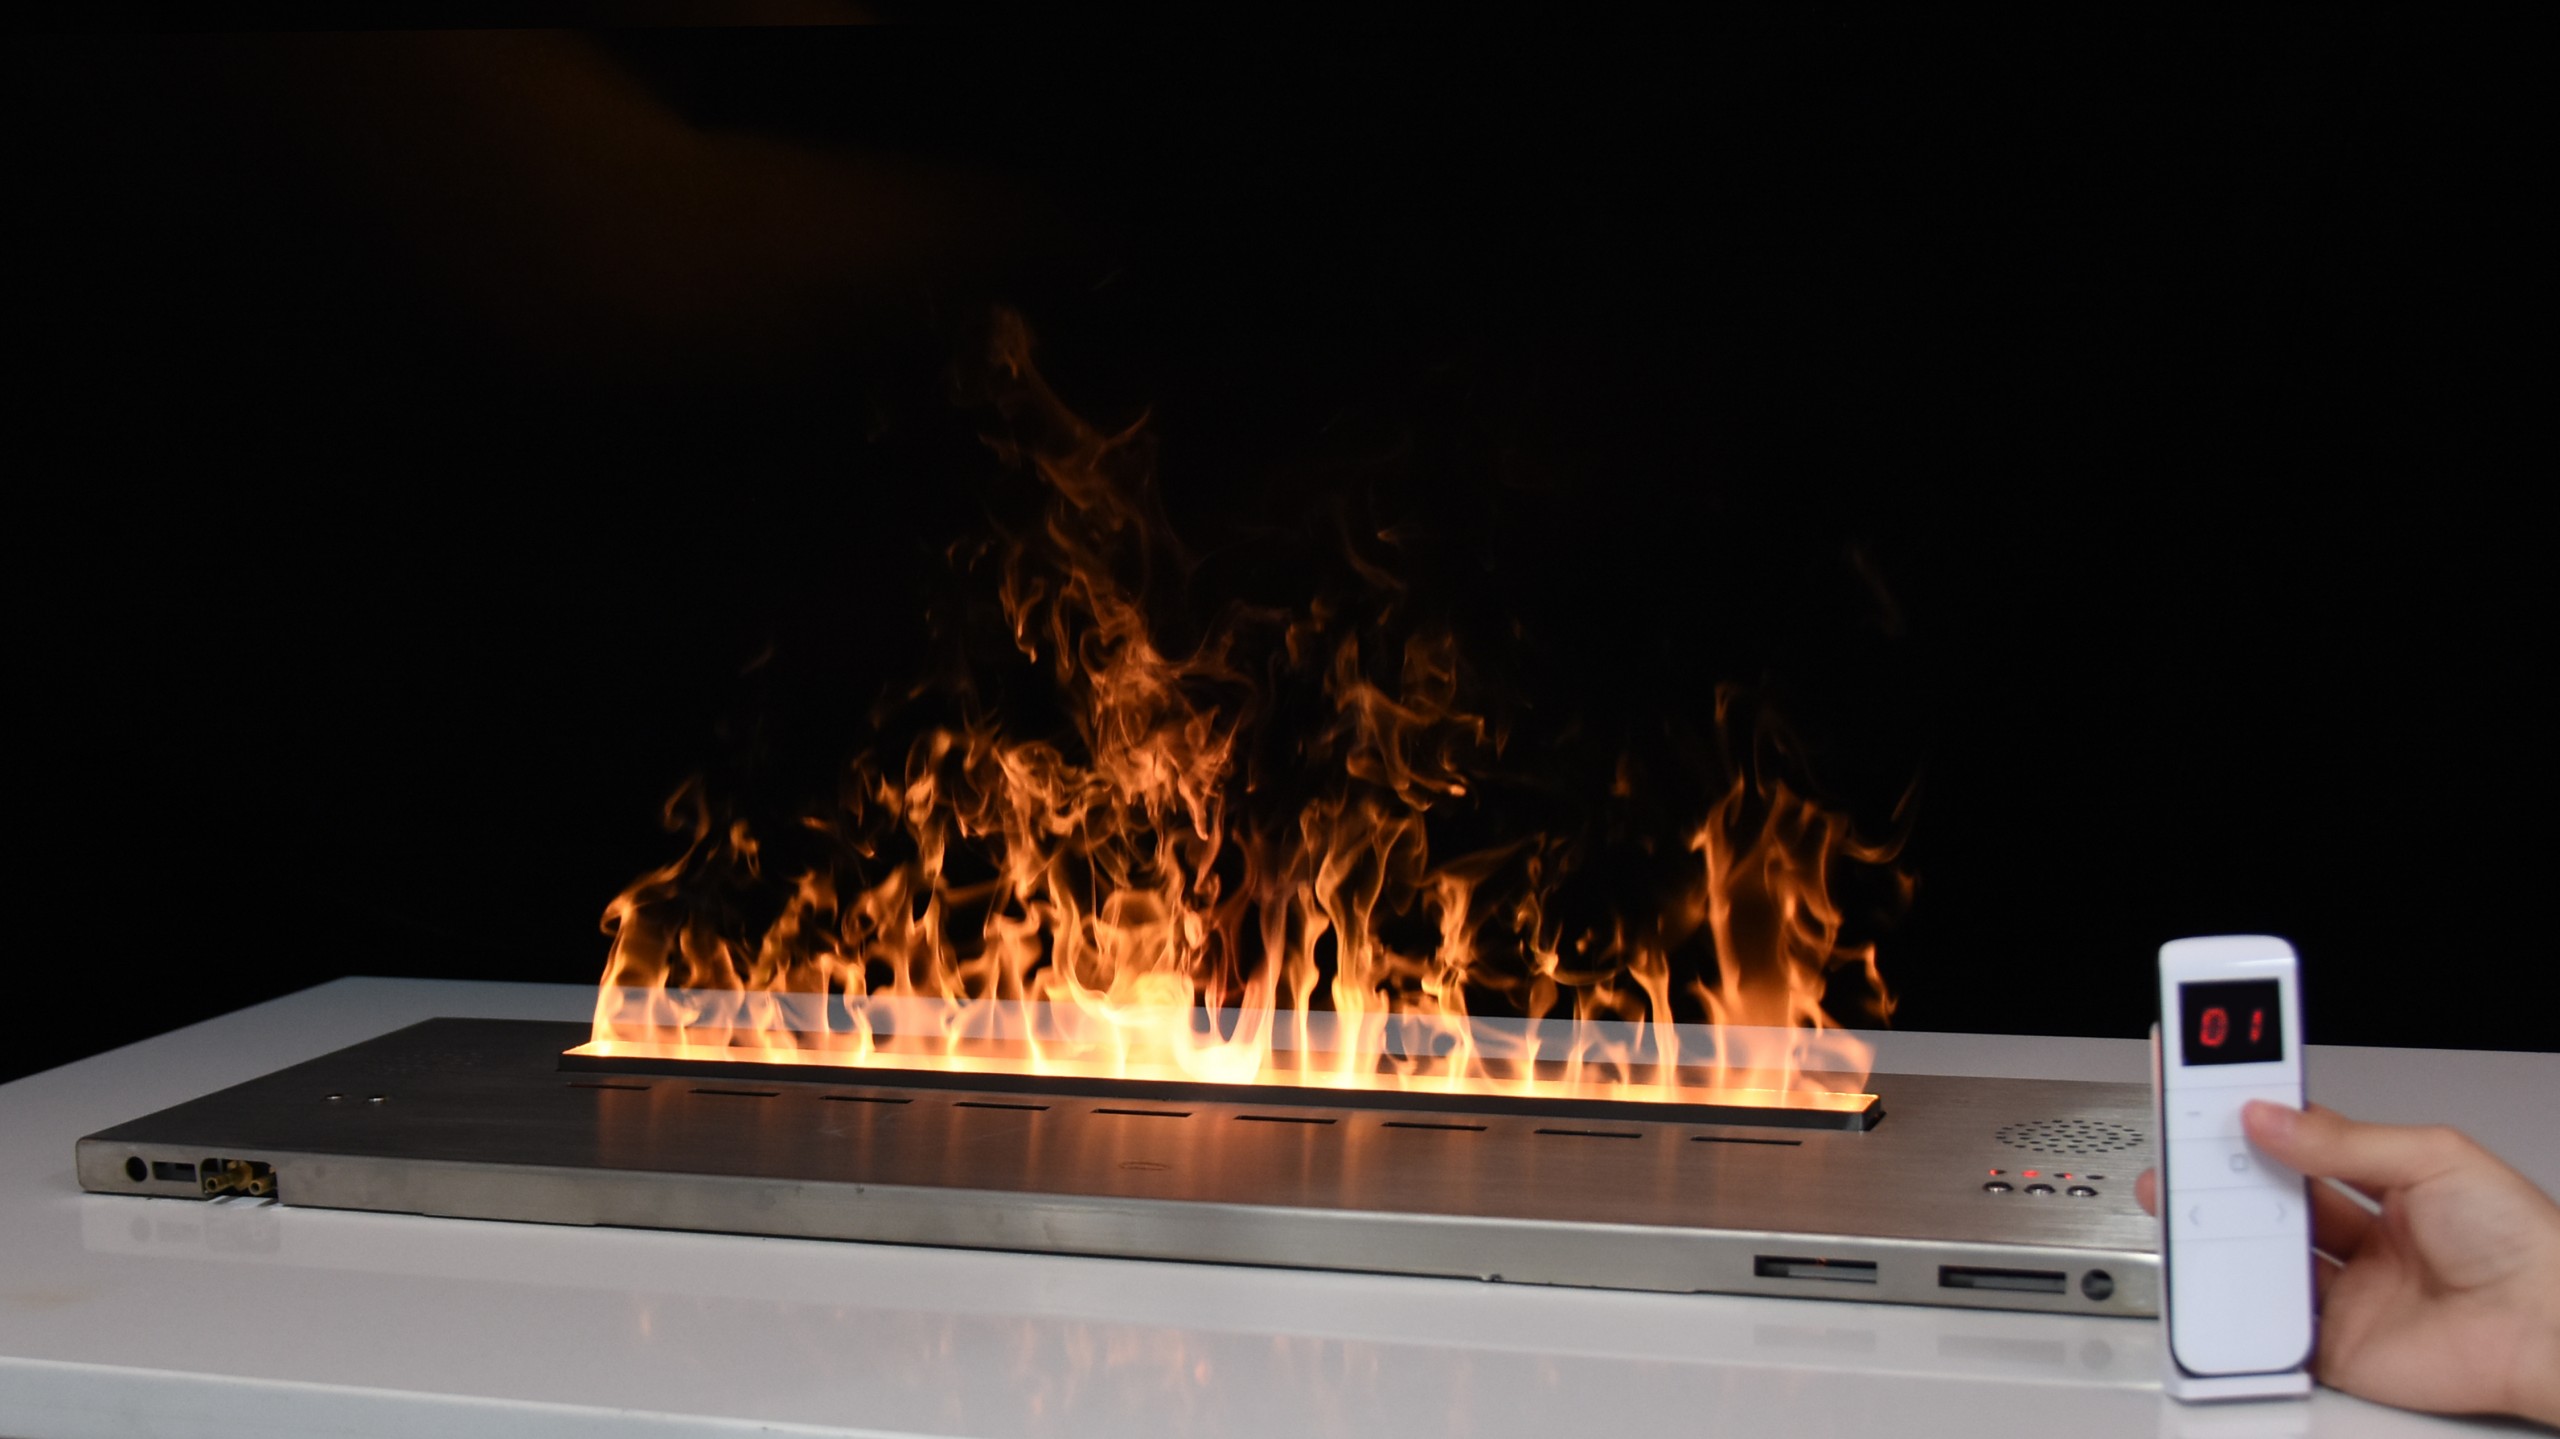 The Most Realistic Looking Water Electric Fireplace-Art-fire